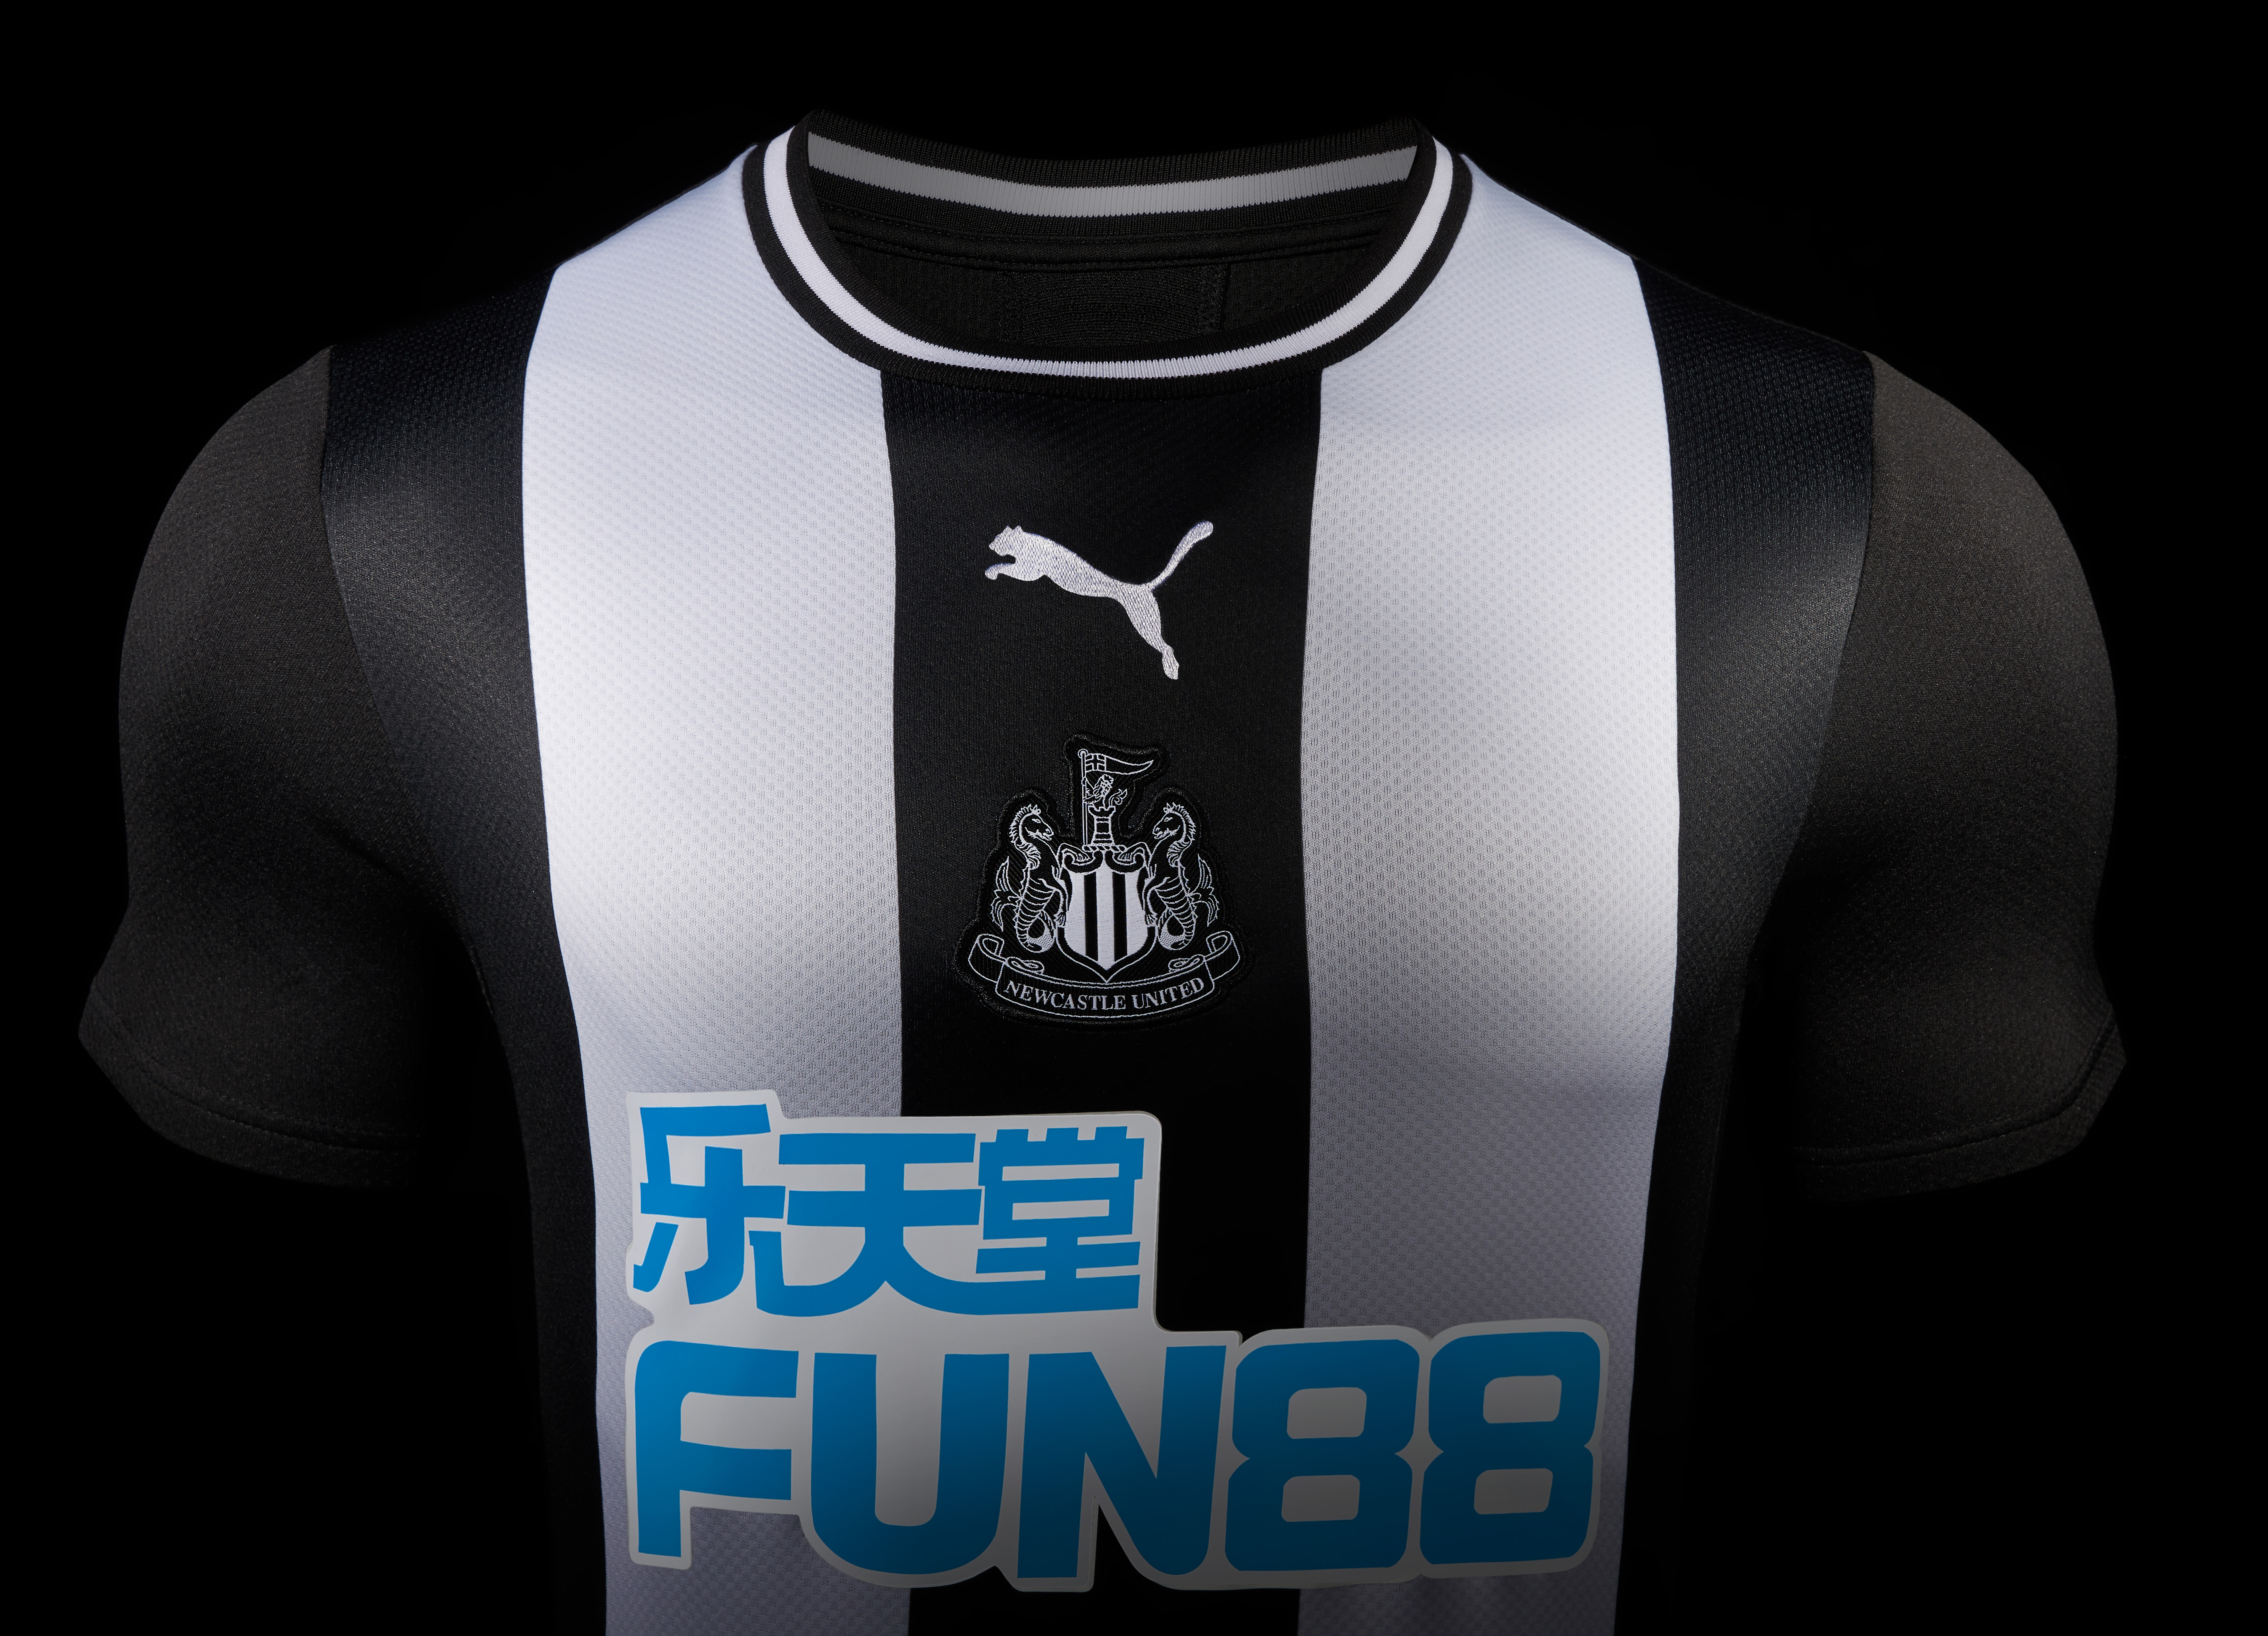 newcastle home jersey